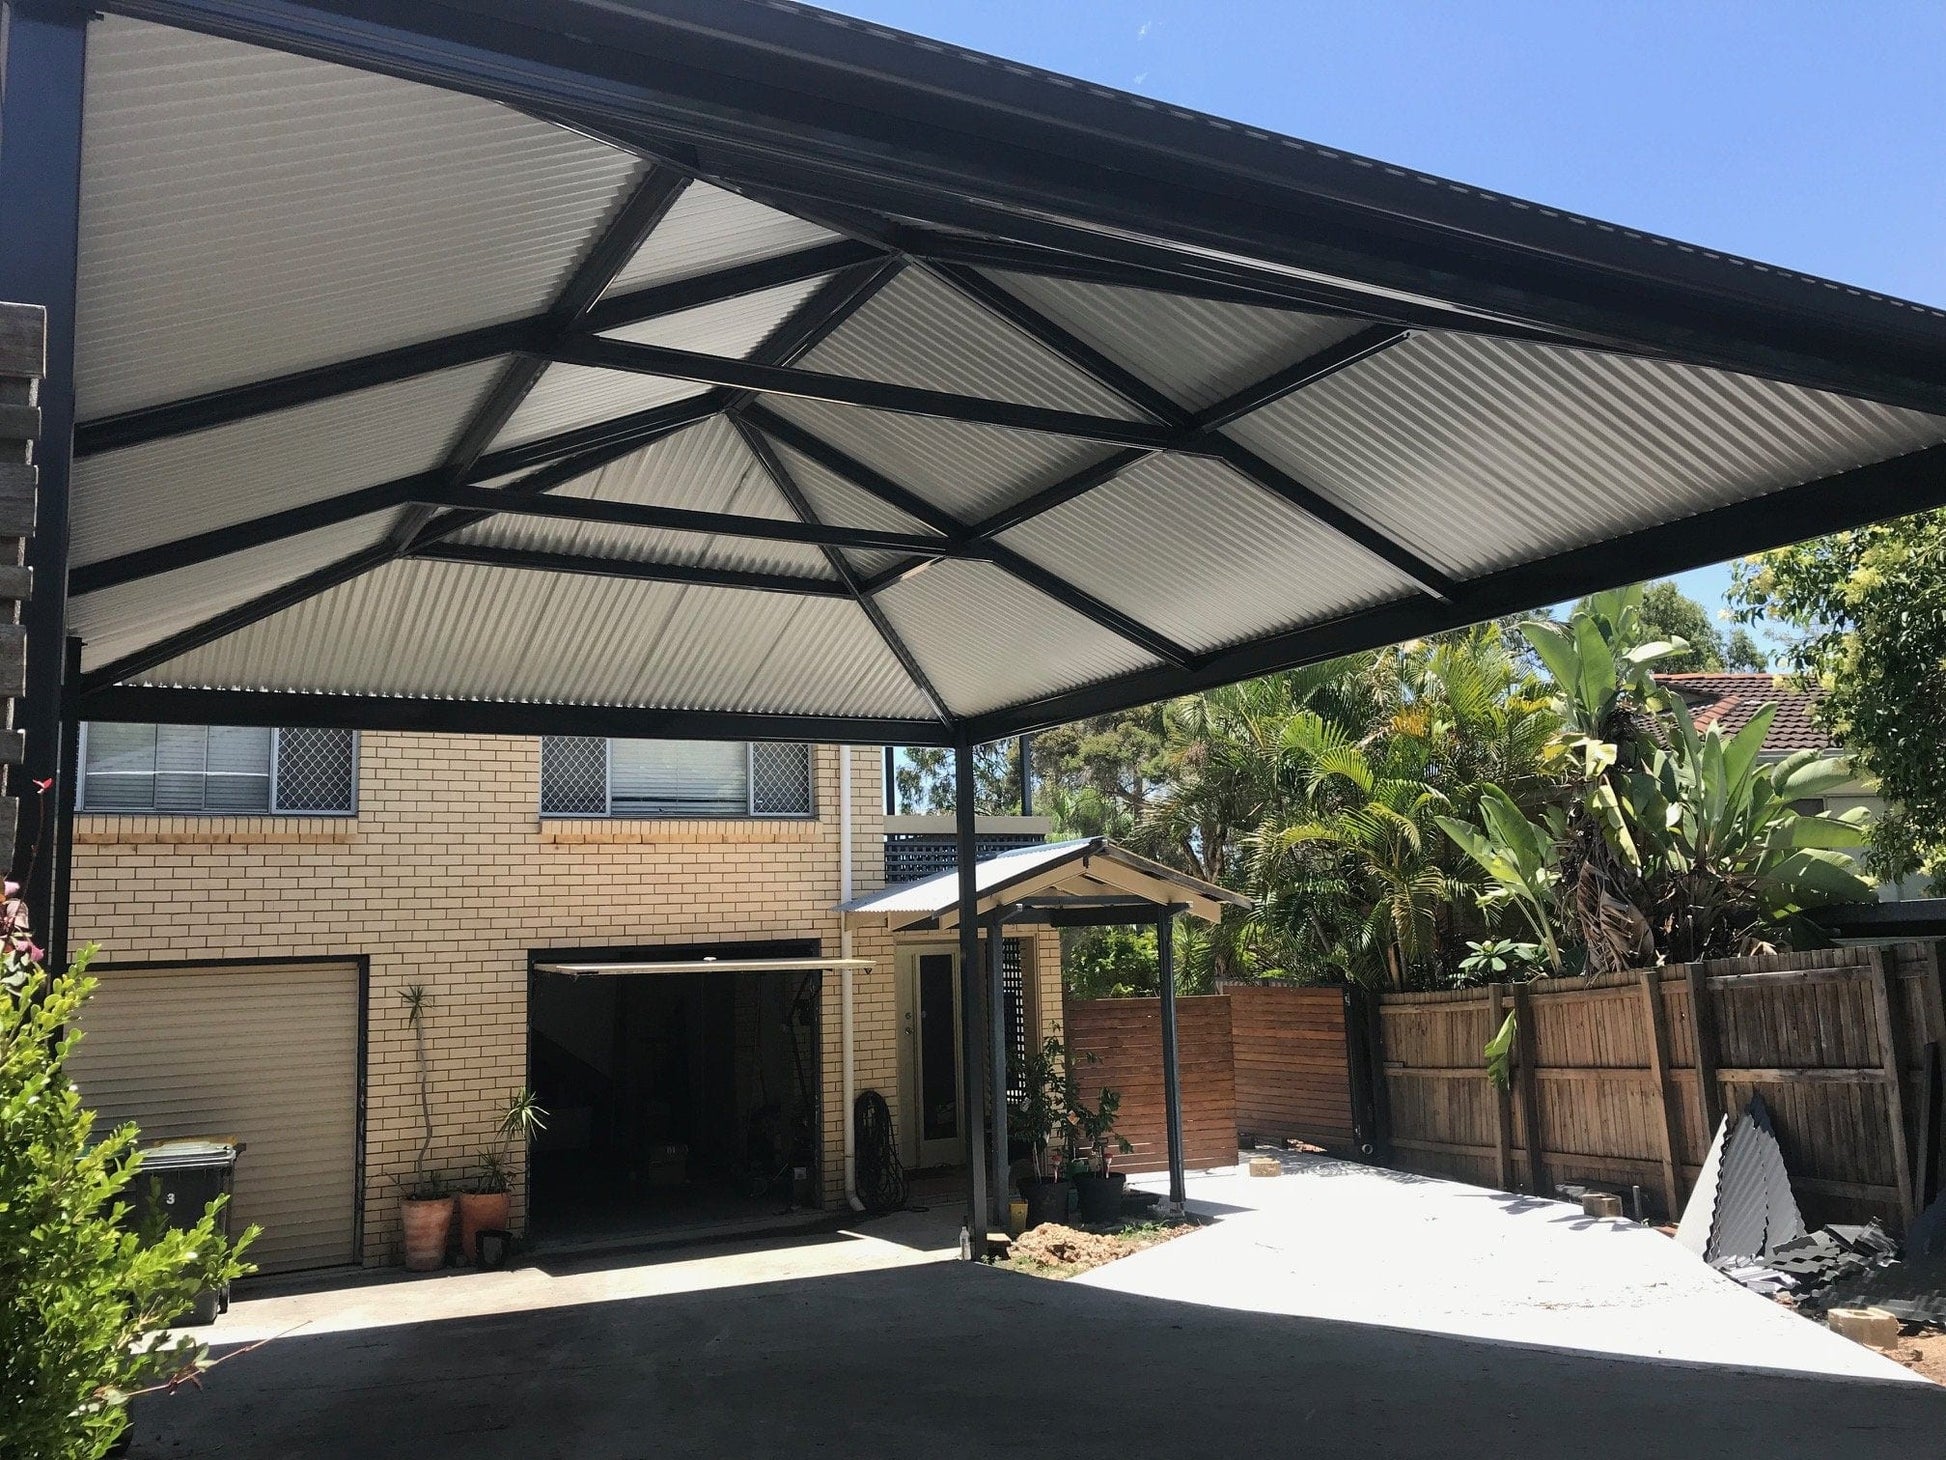 Insulated Gable Patio - 8m x 6m - Supply & Install QHI National